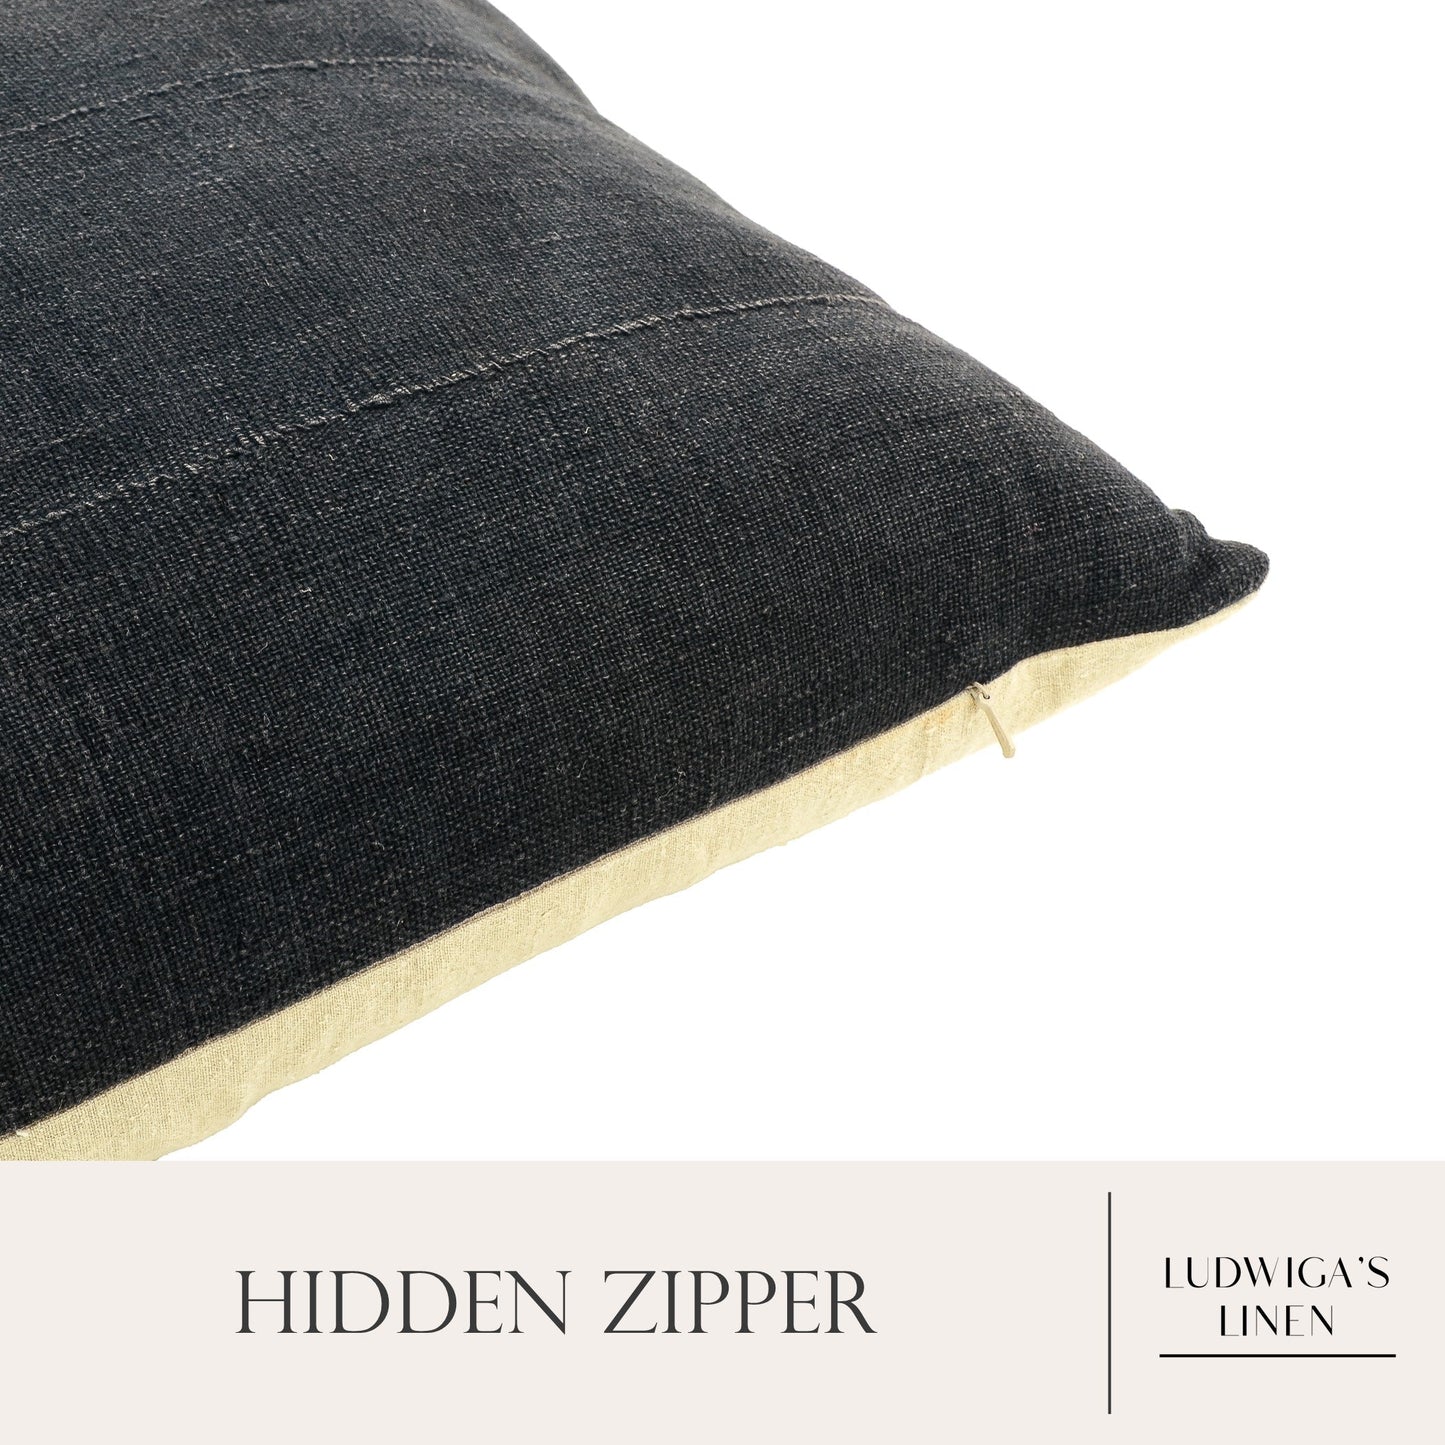 Hidden zipper closure allows removal of the insert to care for the cover